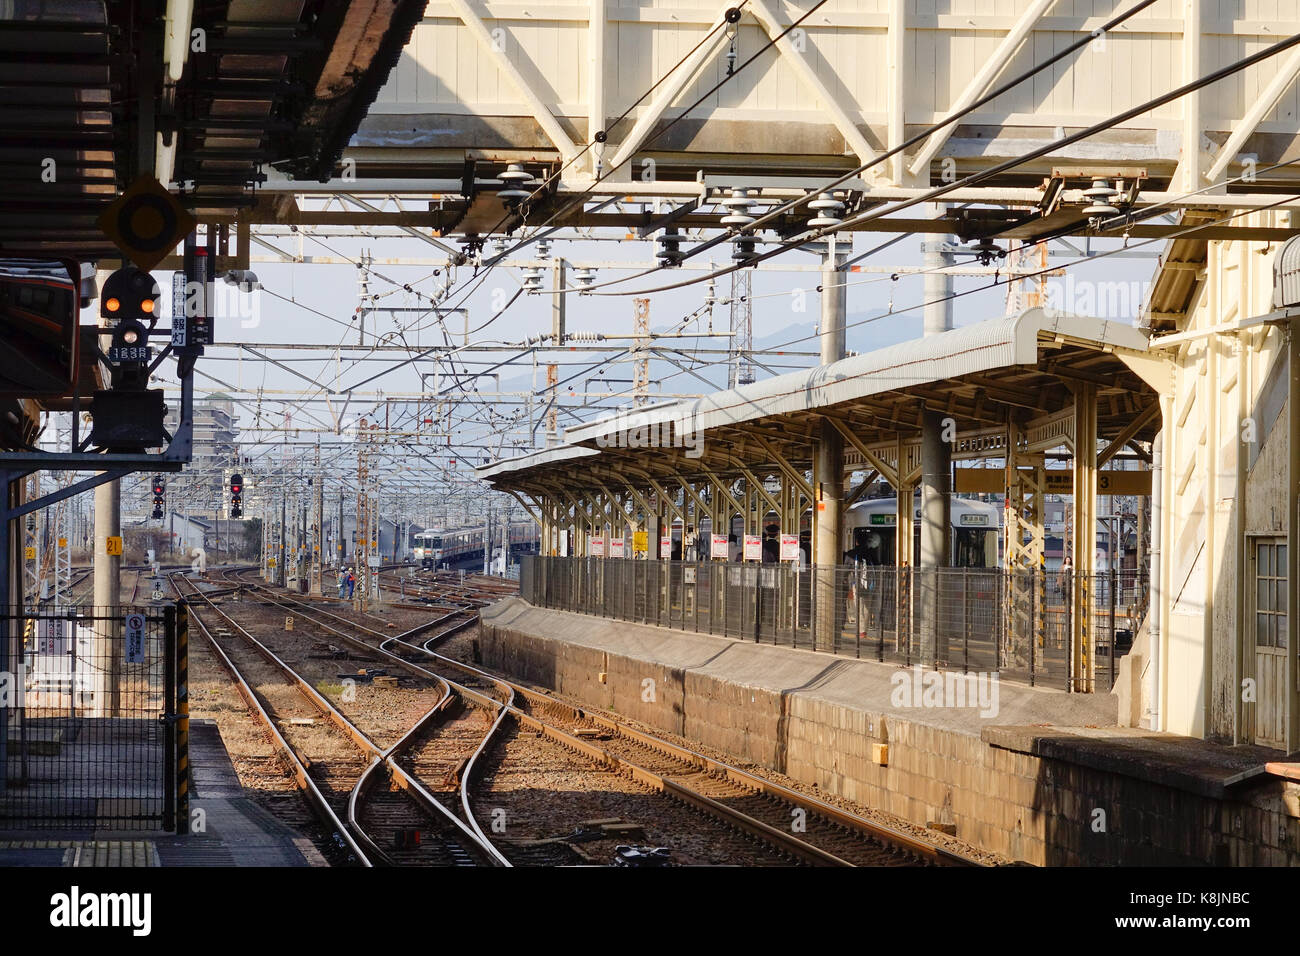 Tokyo, Japan - Dec 25, 2015. Platform with tracks at Hachioji railway station in Tokyo, Japan. Railways are the most important means of passenger tran Stock Photo